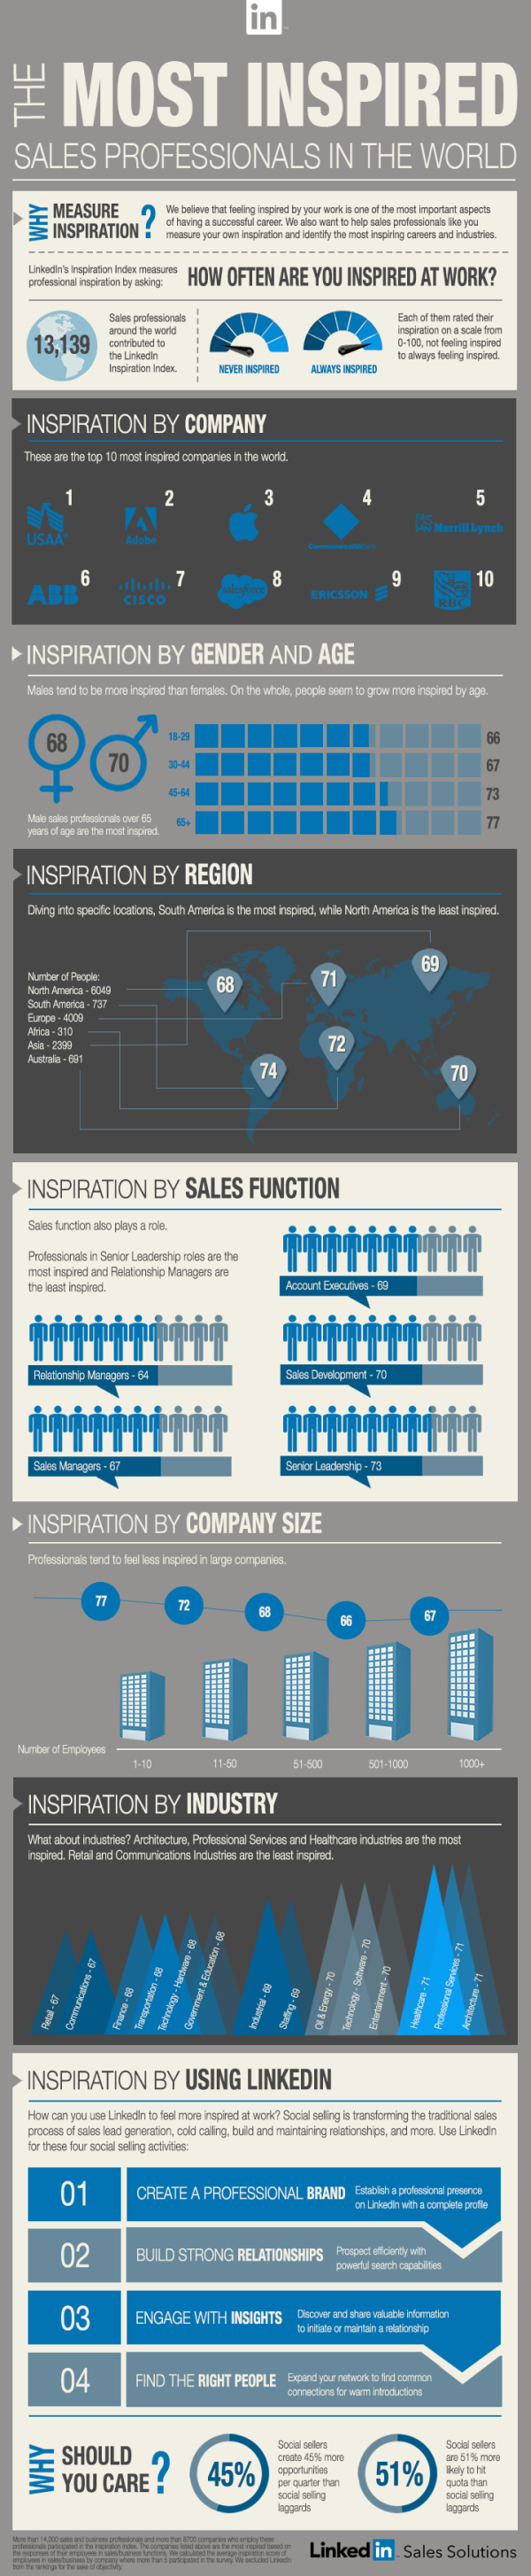 Infographic Inspiration From The Best Brands In Content Marketing image linkedin sales infographic 600x2910.png